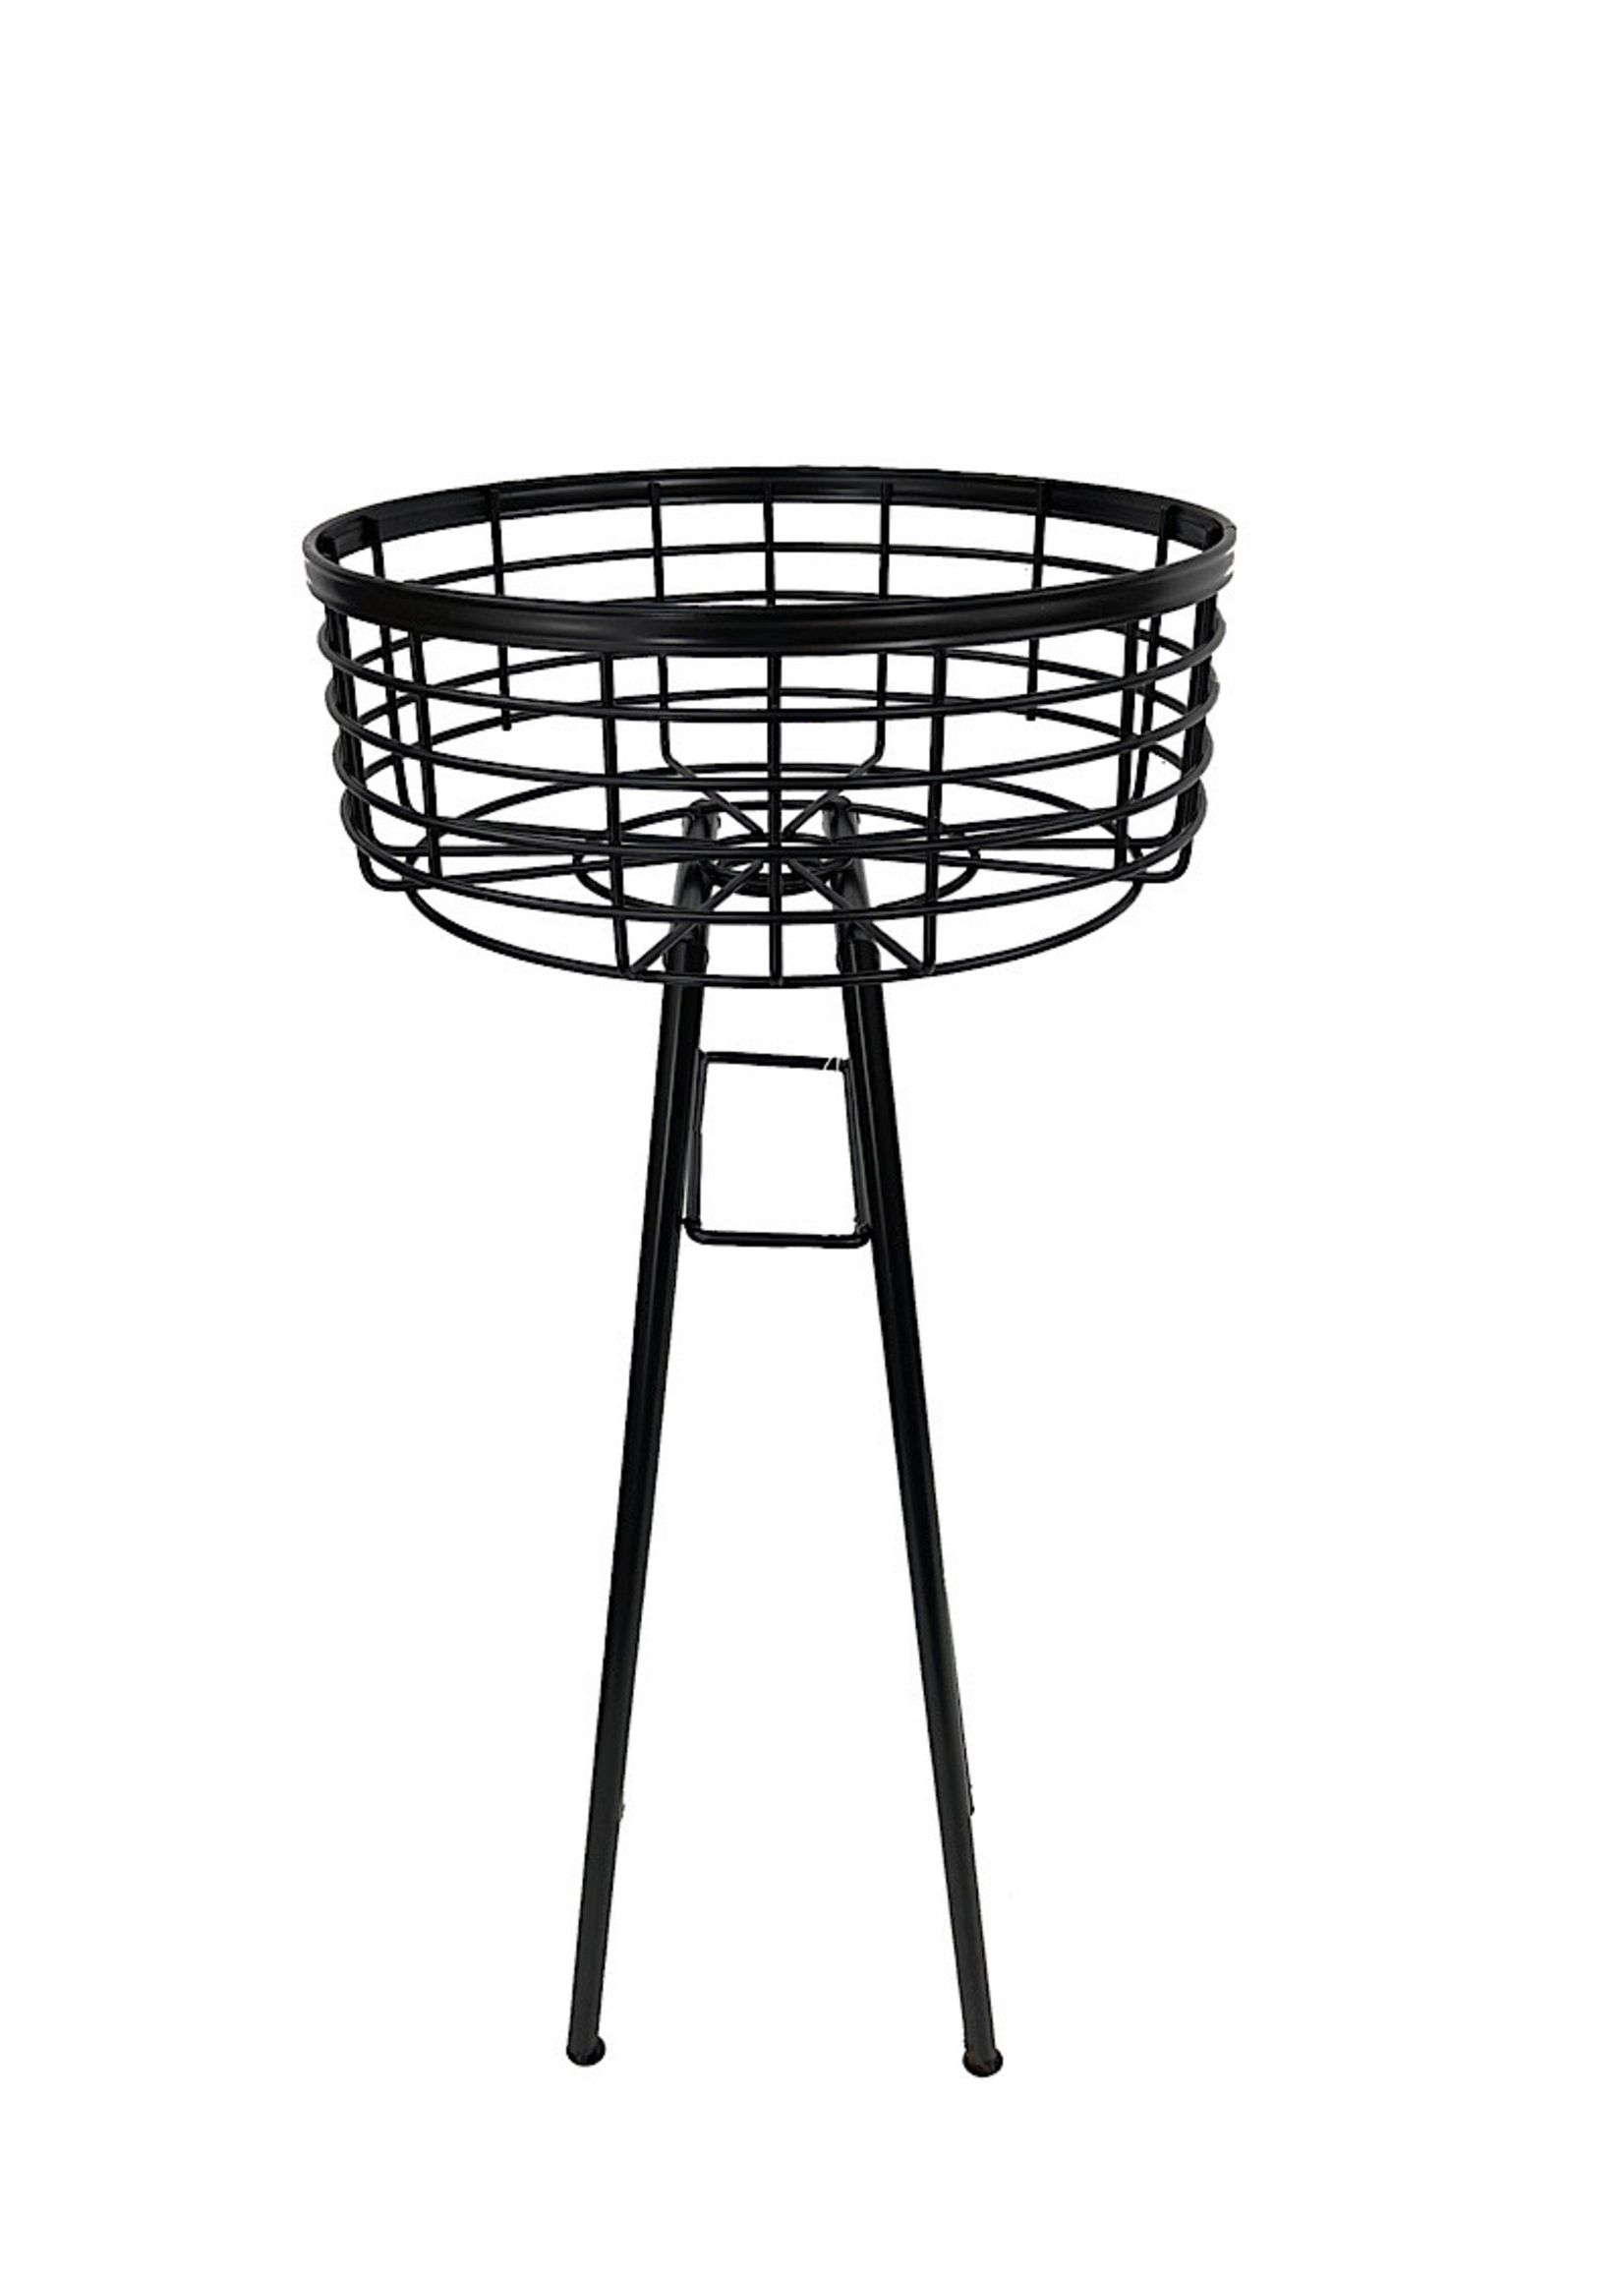 Widely Used 24 Inch Plant Stands Within Wire Basket Plant Stand 24 Inch – The Garden Corner (View 3 of 15)